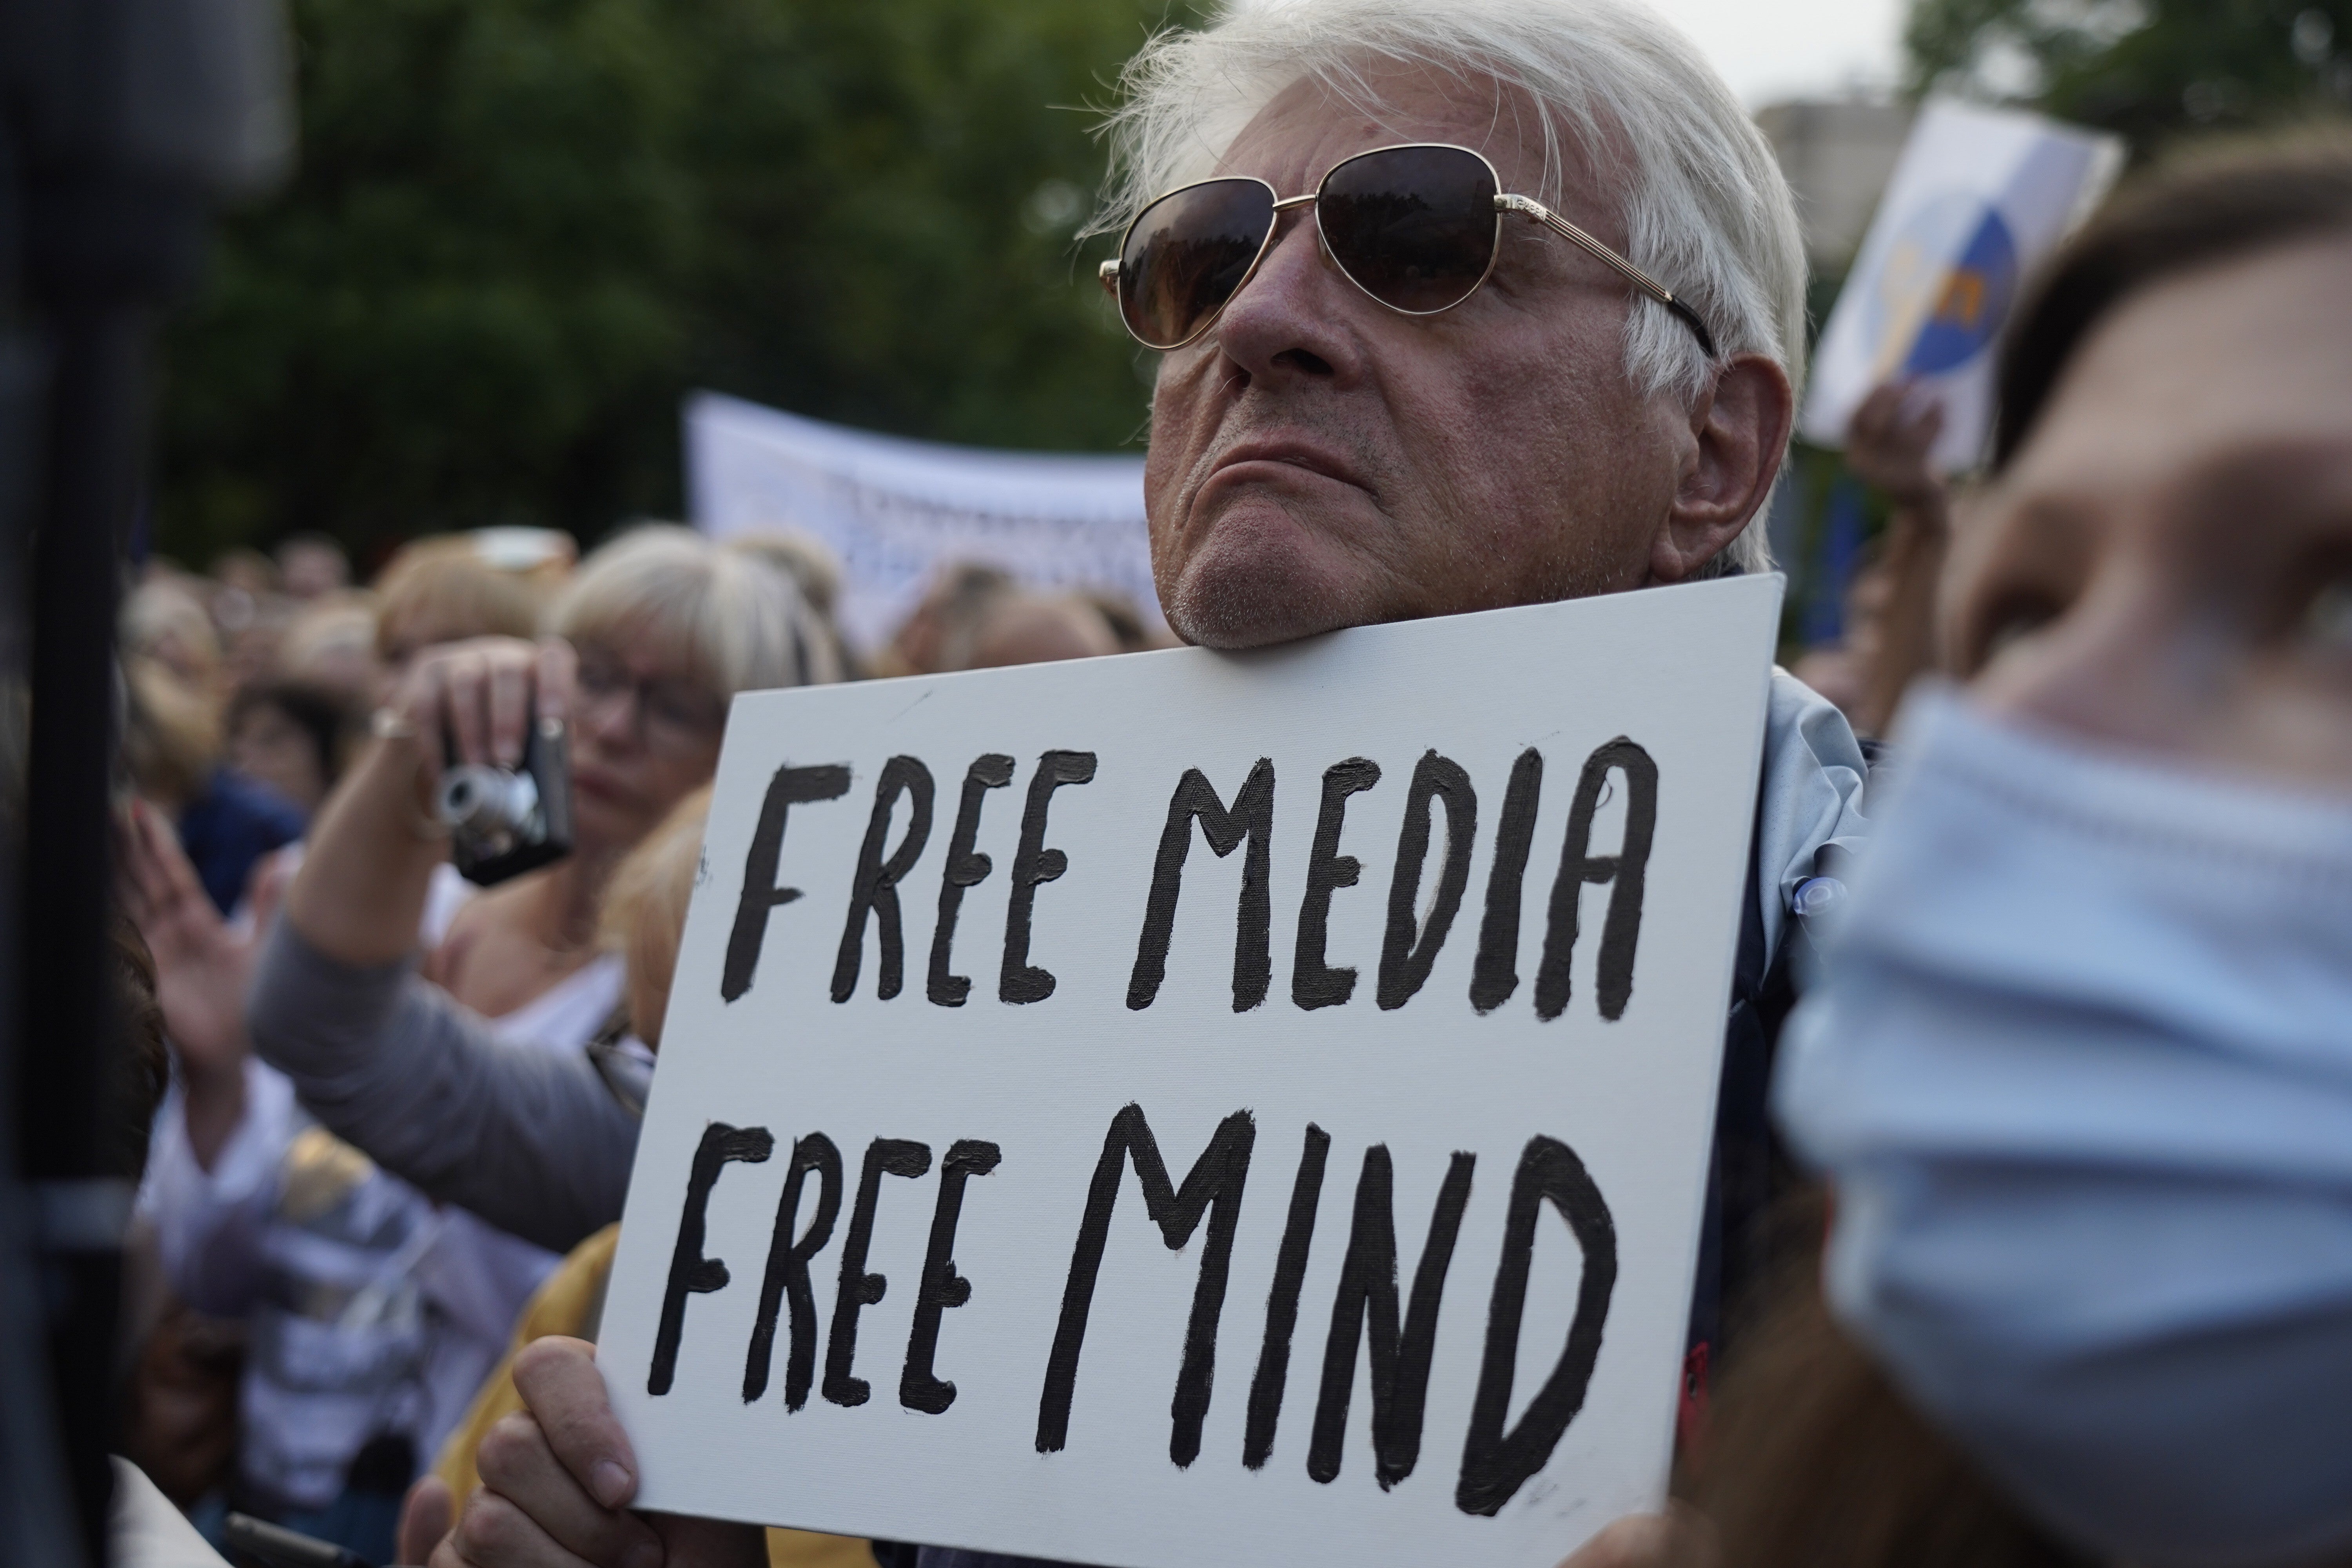 Demonstration in support of free media in Warsaw